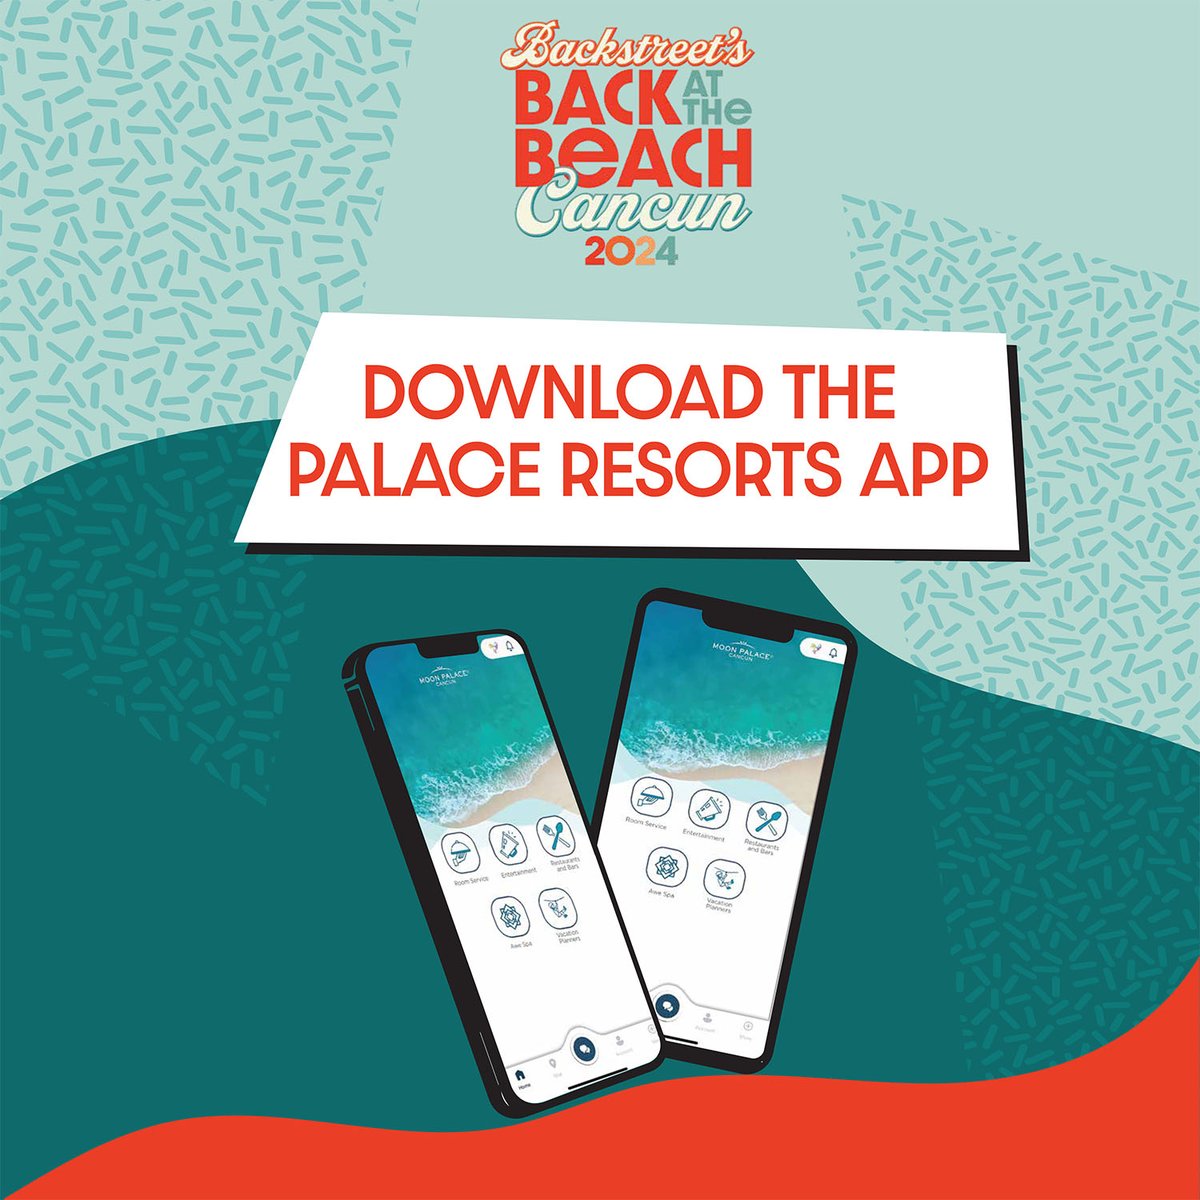 Get your hands on the @PalaceResorts app before you arrive in Mexico so you can begin to explore Moon Palace, learn how to order Room Service during the event, make Awe Spa reservations, and more! 📲